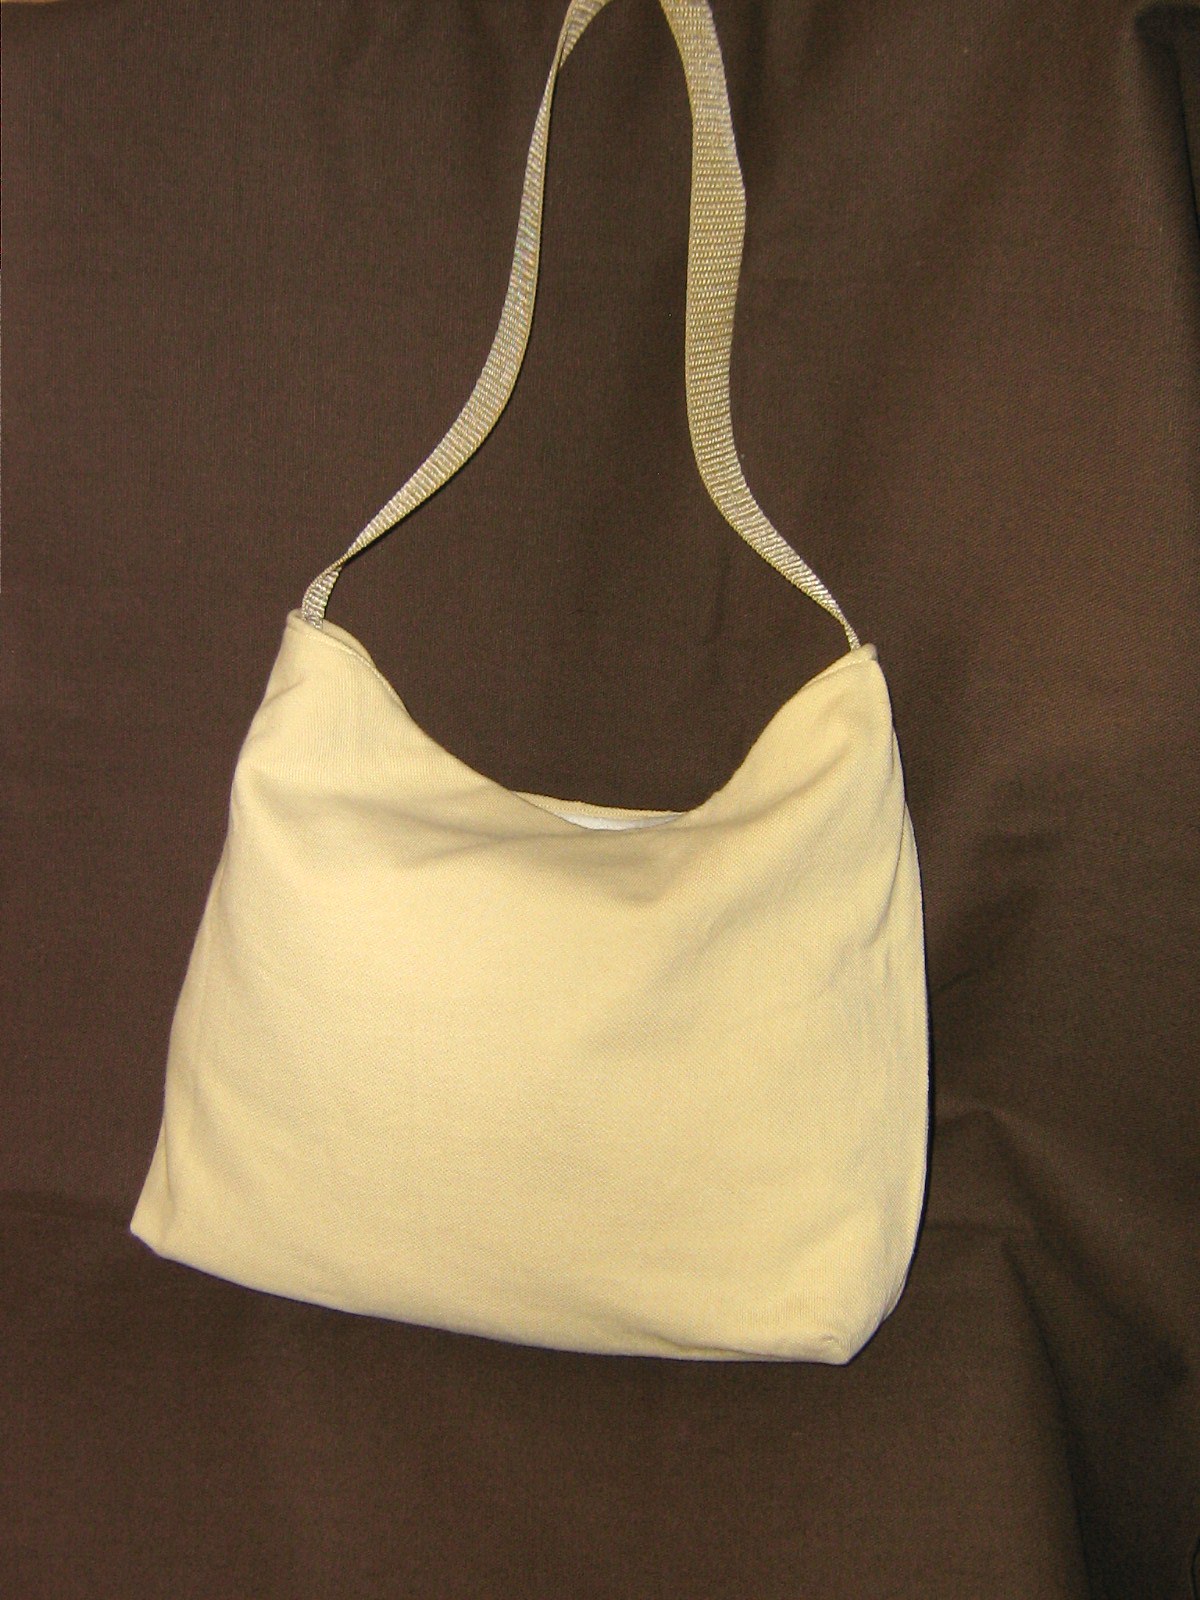 Anything handmade....: Another t-shirt bag and card holder